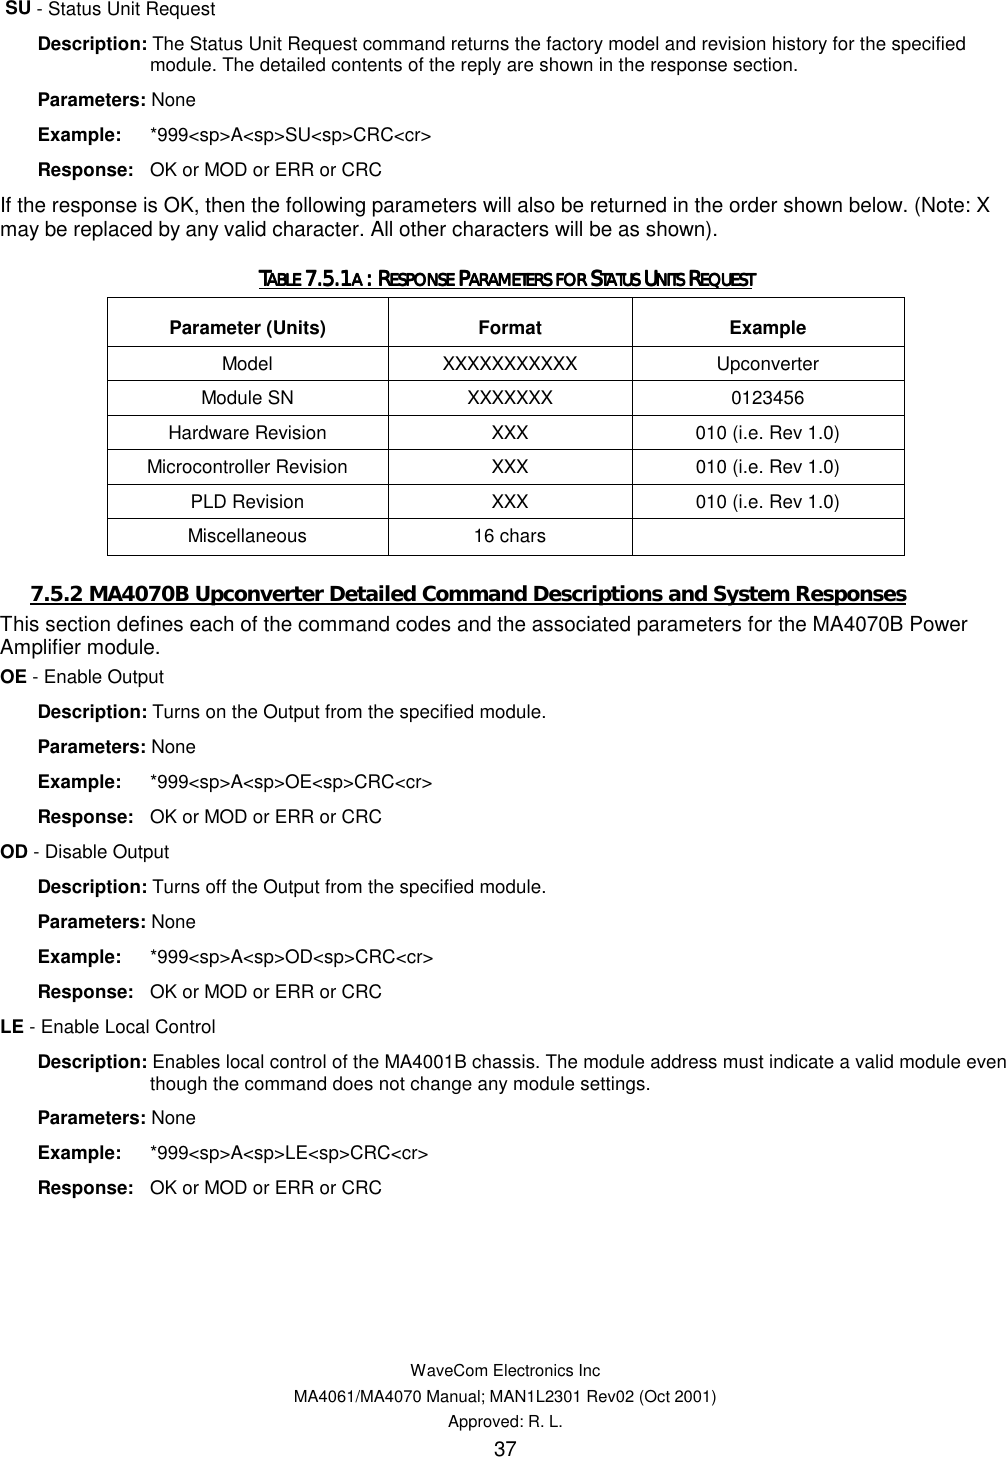   WaveCom Electronics Inc MA4061/MA4070 Manual; MAN1L2301 Rev02 (Oct 2001) Approved: R. L. 37  SU - Status Unit Request  Description: The Status Unit Request command returns the factory model and revision history for the specified module. The detailed contents of the reply are shown in the response section.  Parameters: None  Example: *999&lt;sp&gt;A&lt;sp&gt;SU&lt;sp&gt;CRC&lt;cr&gt;  Response:  OK or MOD or ERR or CRC If the response is OK, then the following parameters will also be returned in the order shown below. (Note: X may be replaced by any valid character. All other characters will be as shown). TTTTABLE ABLE ABLE ABLE 7.5.17.5.17.5.17.5.1A A A A : R: R: R: RESPONSE ESPONSE ESPONSE ESPONSE PPPPARAMETERS FOR ARAMETERS FOR ARAMETERS FOR ARAMETERS FOR SSSSTATUS TATUS TATUS TATUS UUUUNITS NITS NITS NITS RRRREQUESTEQUESTEQUESTEQUEST    Parameter (Units)  Format  Example Model  XXXXXXXXXXX Upconverter Module SN  XXXXXXX  0123456 Hardware Revision  XXX  010 (i.e. Rev 1.0) Microcontroller Revision  XXX  010 (i.e. Rev 1.0) PLD Revision  XXX  010 (i.e. Rev 1.0) Miscellaneous 16 chars   7.5.2 MA4070B Upconverter Detailed Command Descriptions and System Responses This section defines each of the command codes and the associated parameters for the MA4070B Power Amplifier module. OE - Enable Output  Description: Turns on the Output from the specified module.  Parameters: None  Example: *999&lt;sp&gt;A&lt;sp&gt;OE&lt;sp&gt;CRC&lt;cr&gt;  Response:  OK or MOD or ERR or CRC OD - Disable Output  Description: Turns off the Output from the specified module.  Parameters: None  Example: *999&lt;sp&gt;A&lt;sp&gt;OD&lt;sp&gt;CRC&lt;cr&gt;  Response:  OK or MOD or ERR or CRC LE - Enable Local Control  Description: Enables local control of the MA4001B chassis. The module address must indicate a valid module even though the command does not change any module settings.  Parameters: None  Example: *999&lt;sp&gt;A&lt;sp&gt;LE&lt;sp&gt;CRC&lt;cr&gt;  Response:  OK or MOD or ERR or CRC 